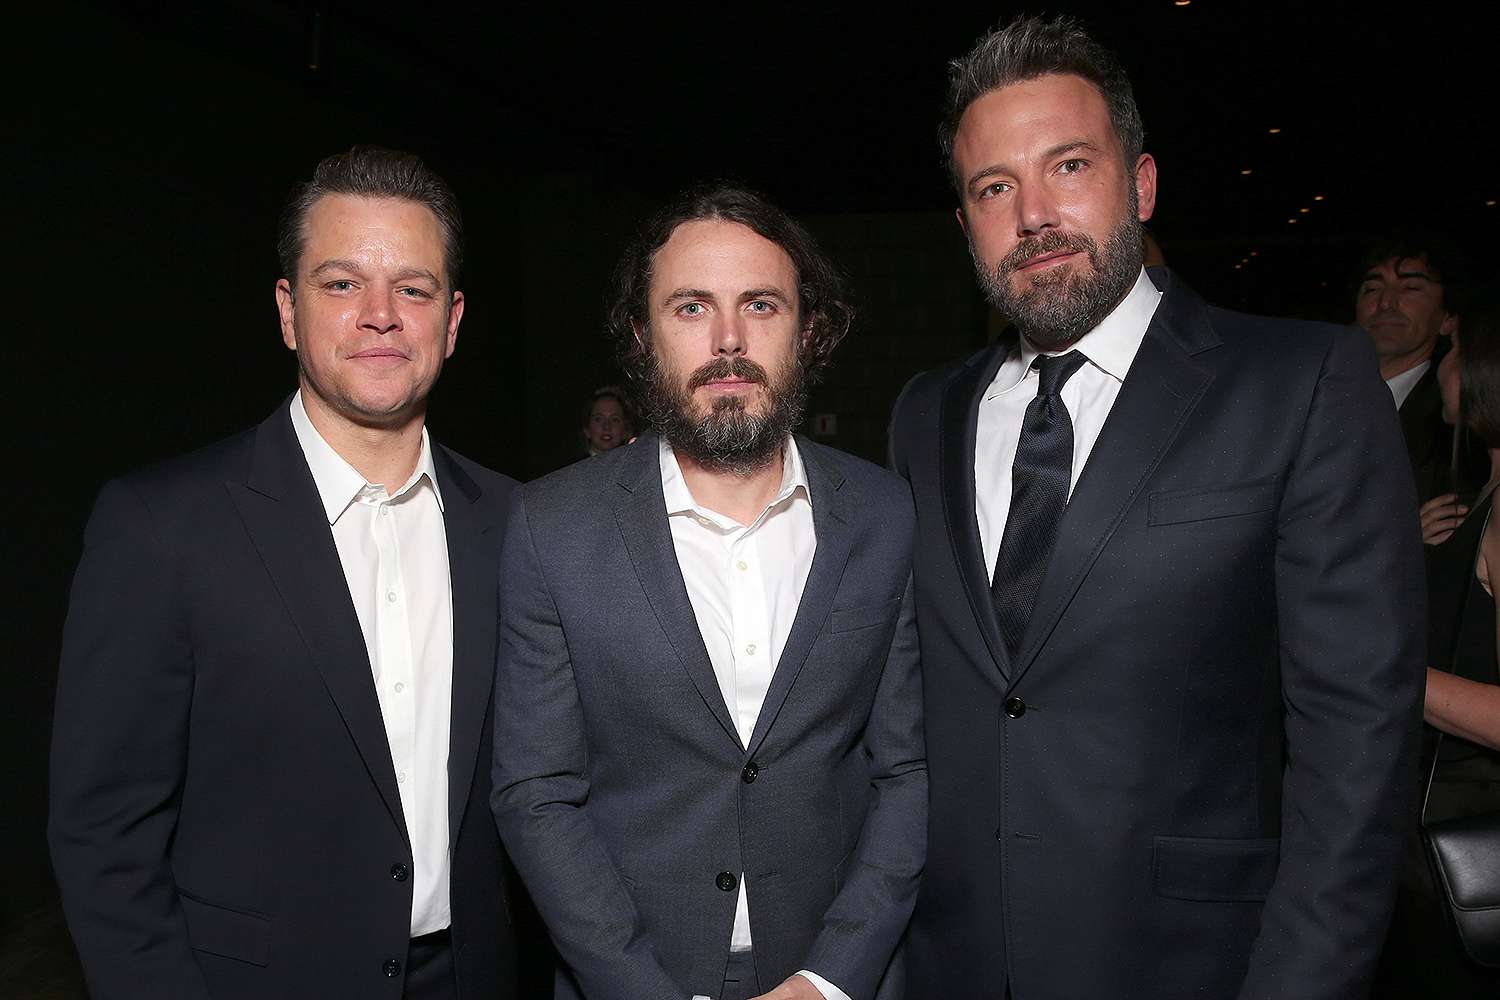 Casey Affleck 'Still Felt Like an Outsider' While Living with Brother Ben and Matt Damon After Moving to L.A.